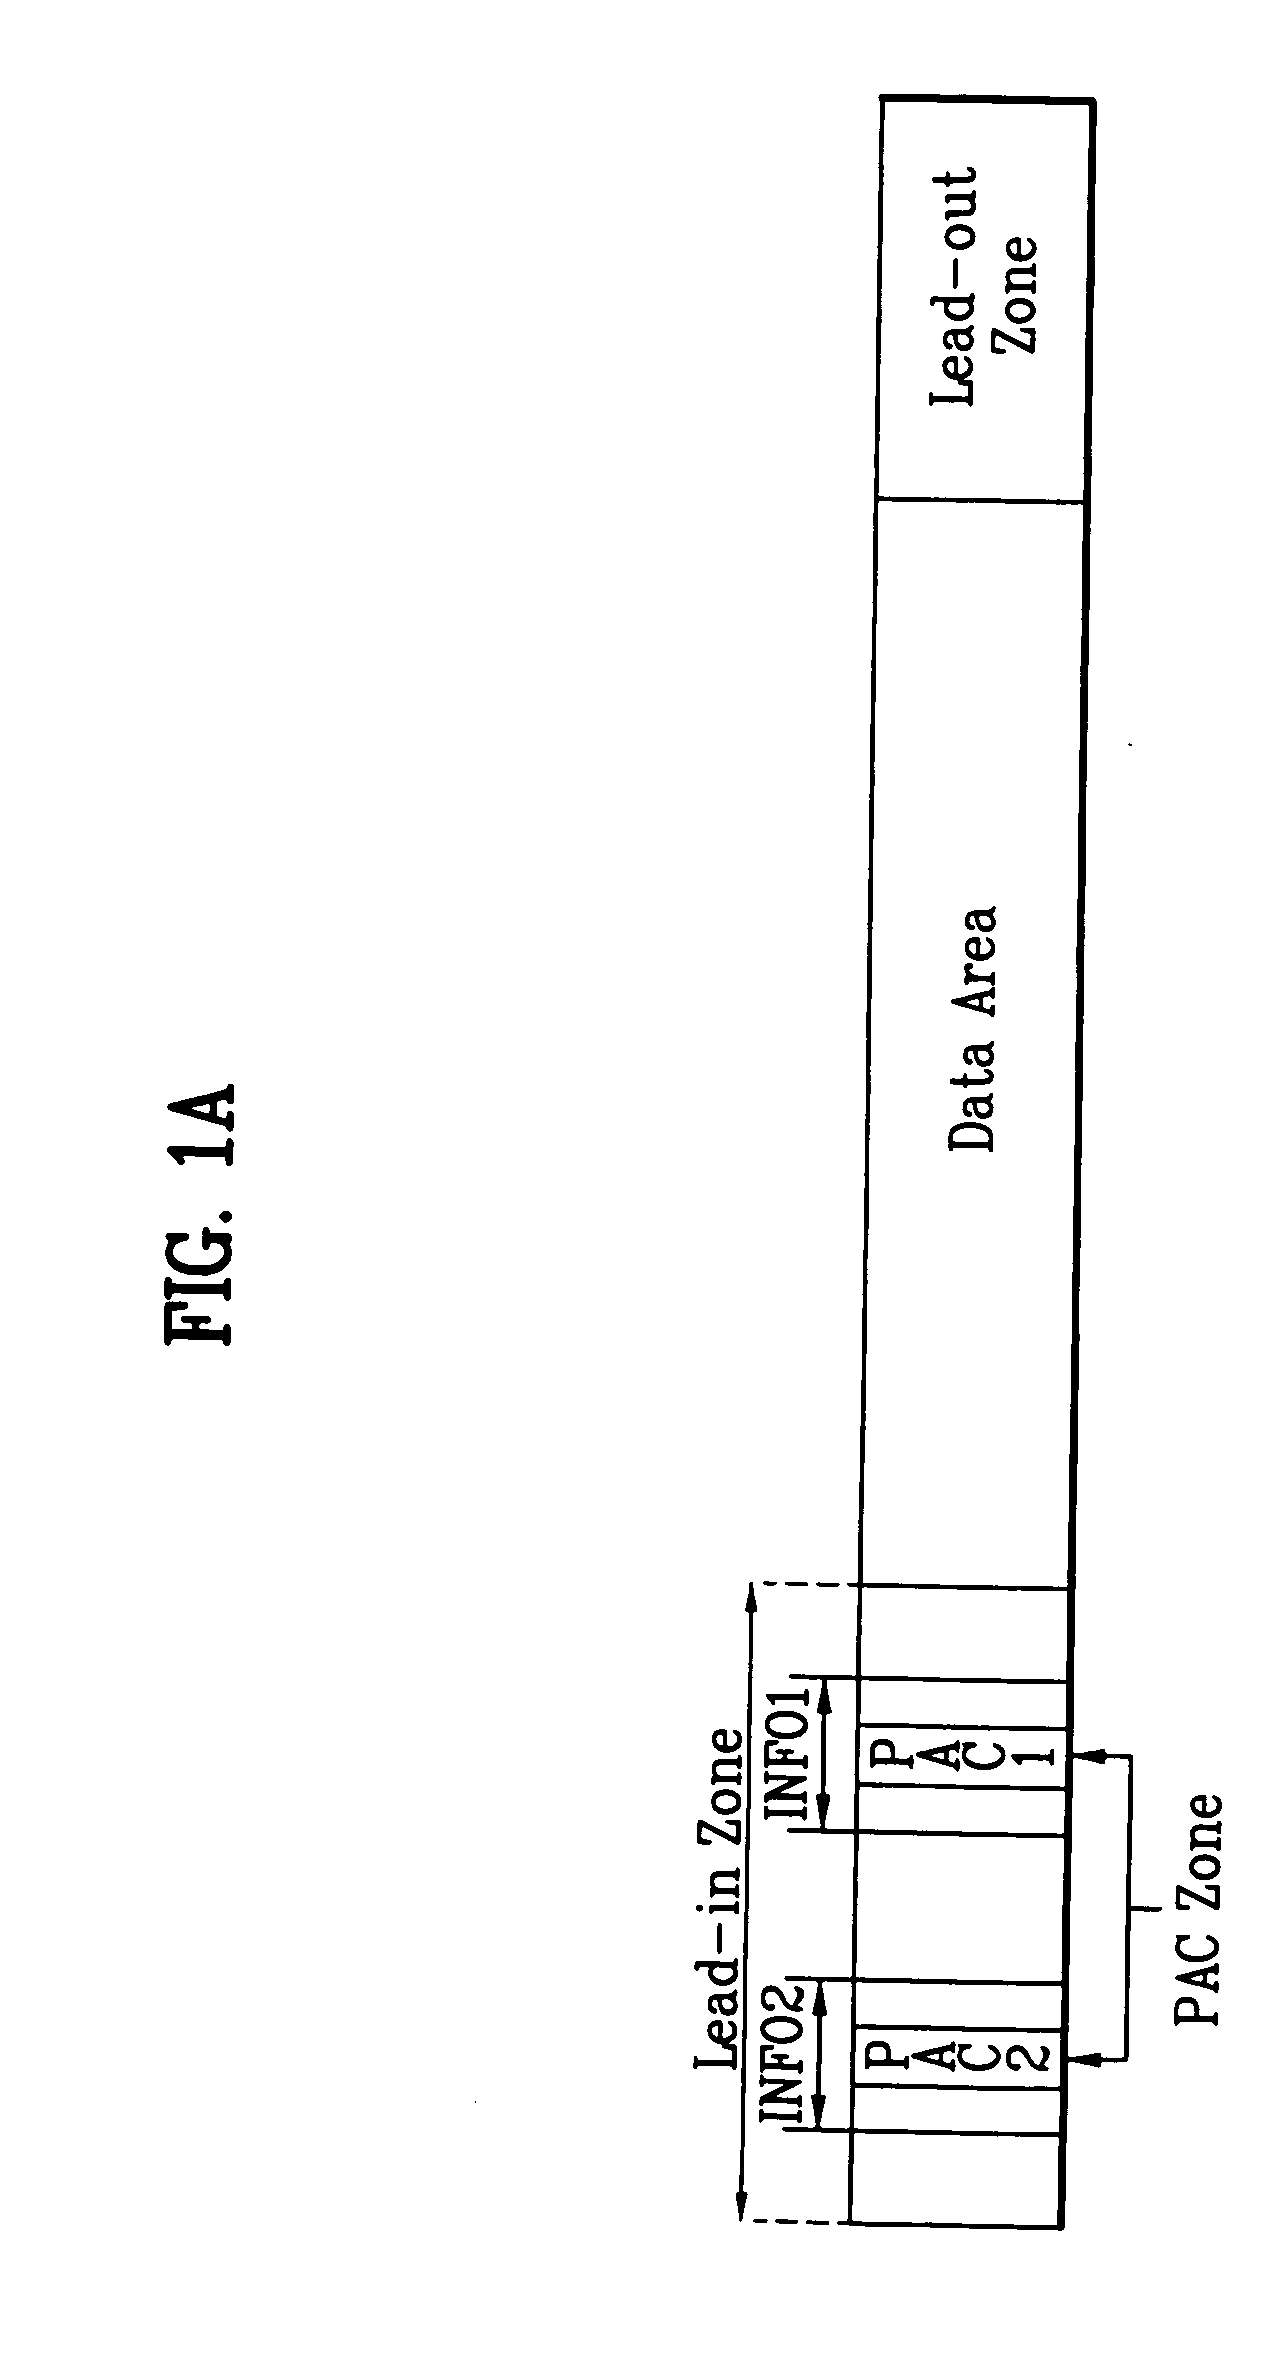 Recording medium with overlapping segment information thereon and apparatus and methods for forming, recording, and reproducing the recording medium